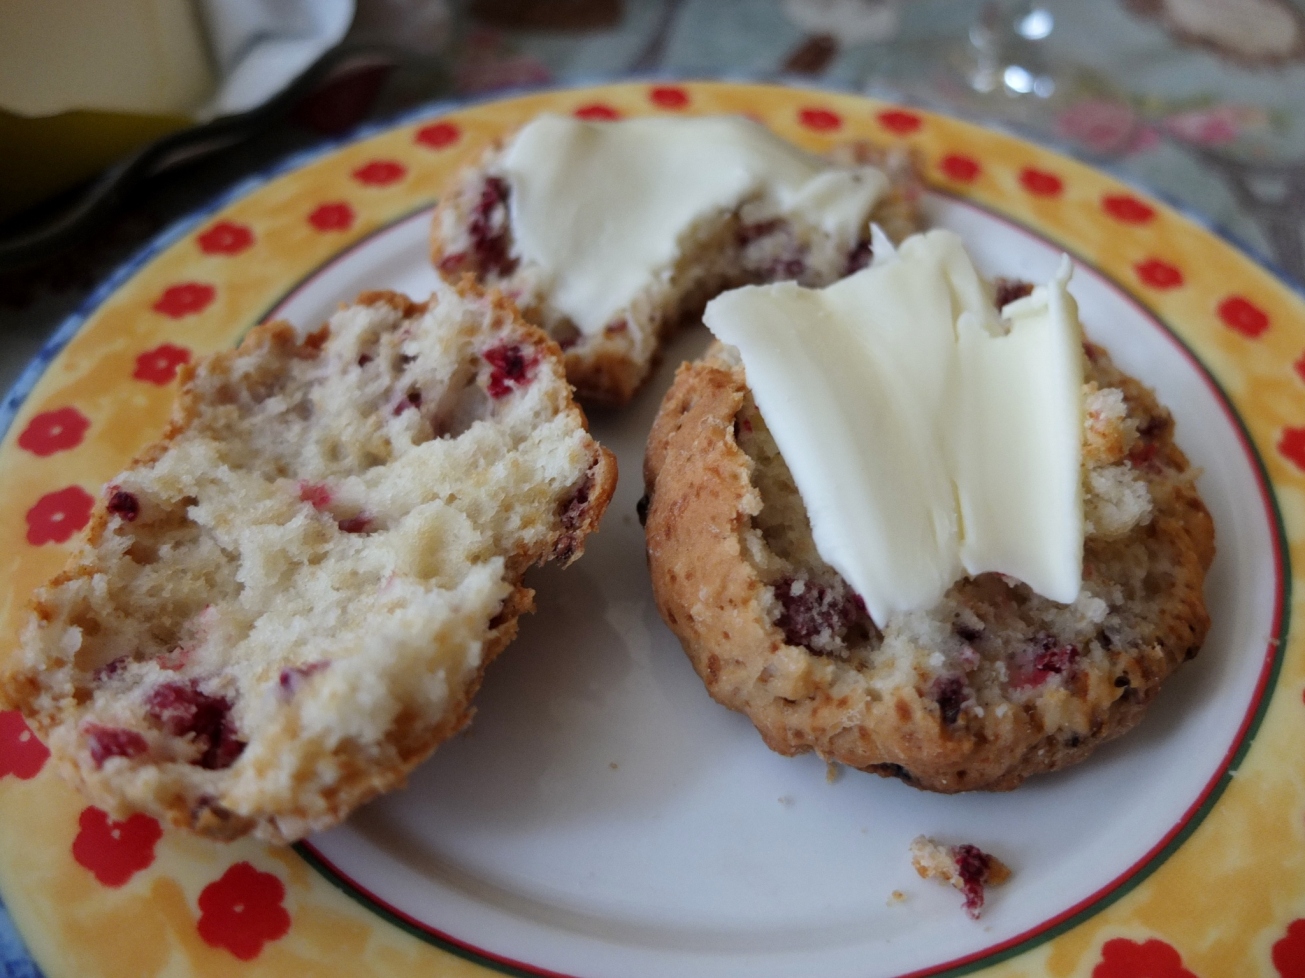 Have another Ispahan scone!